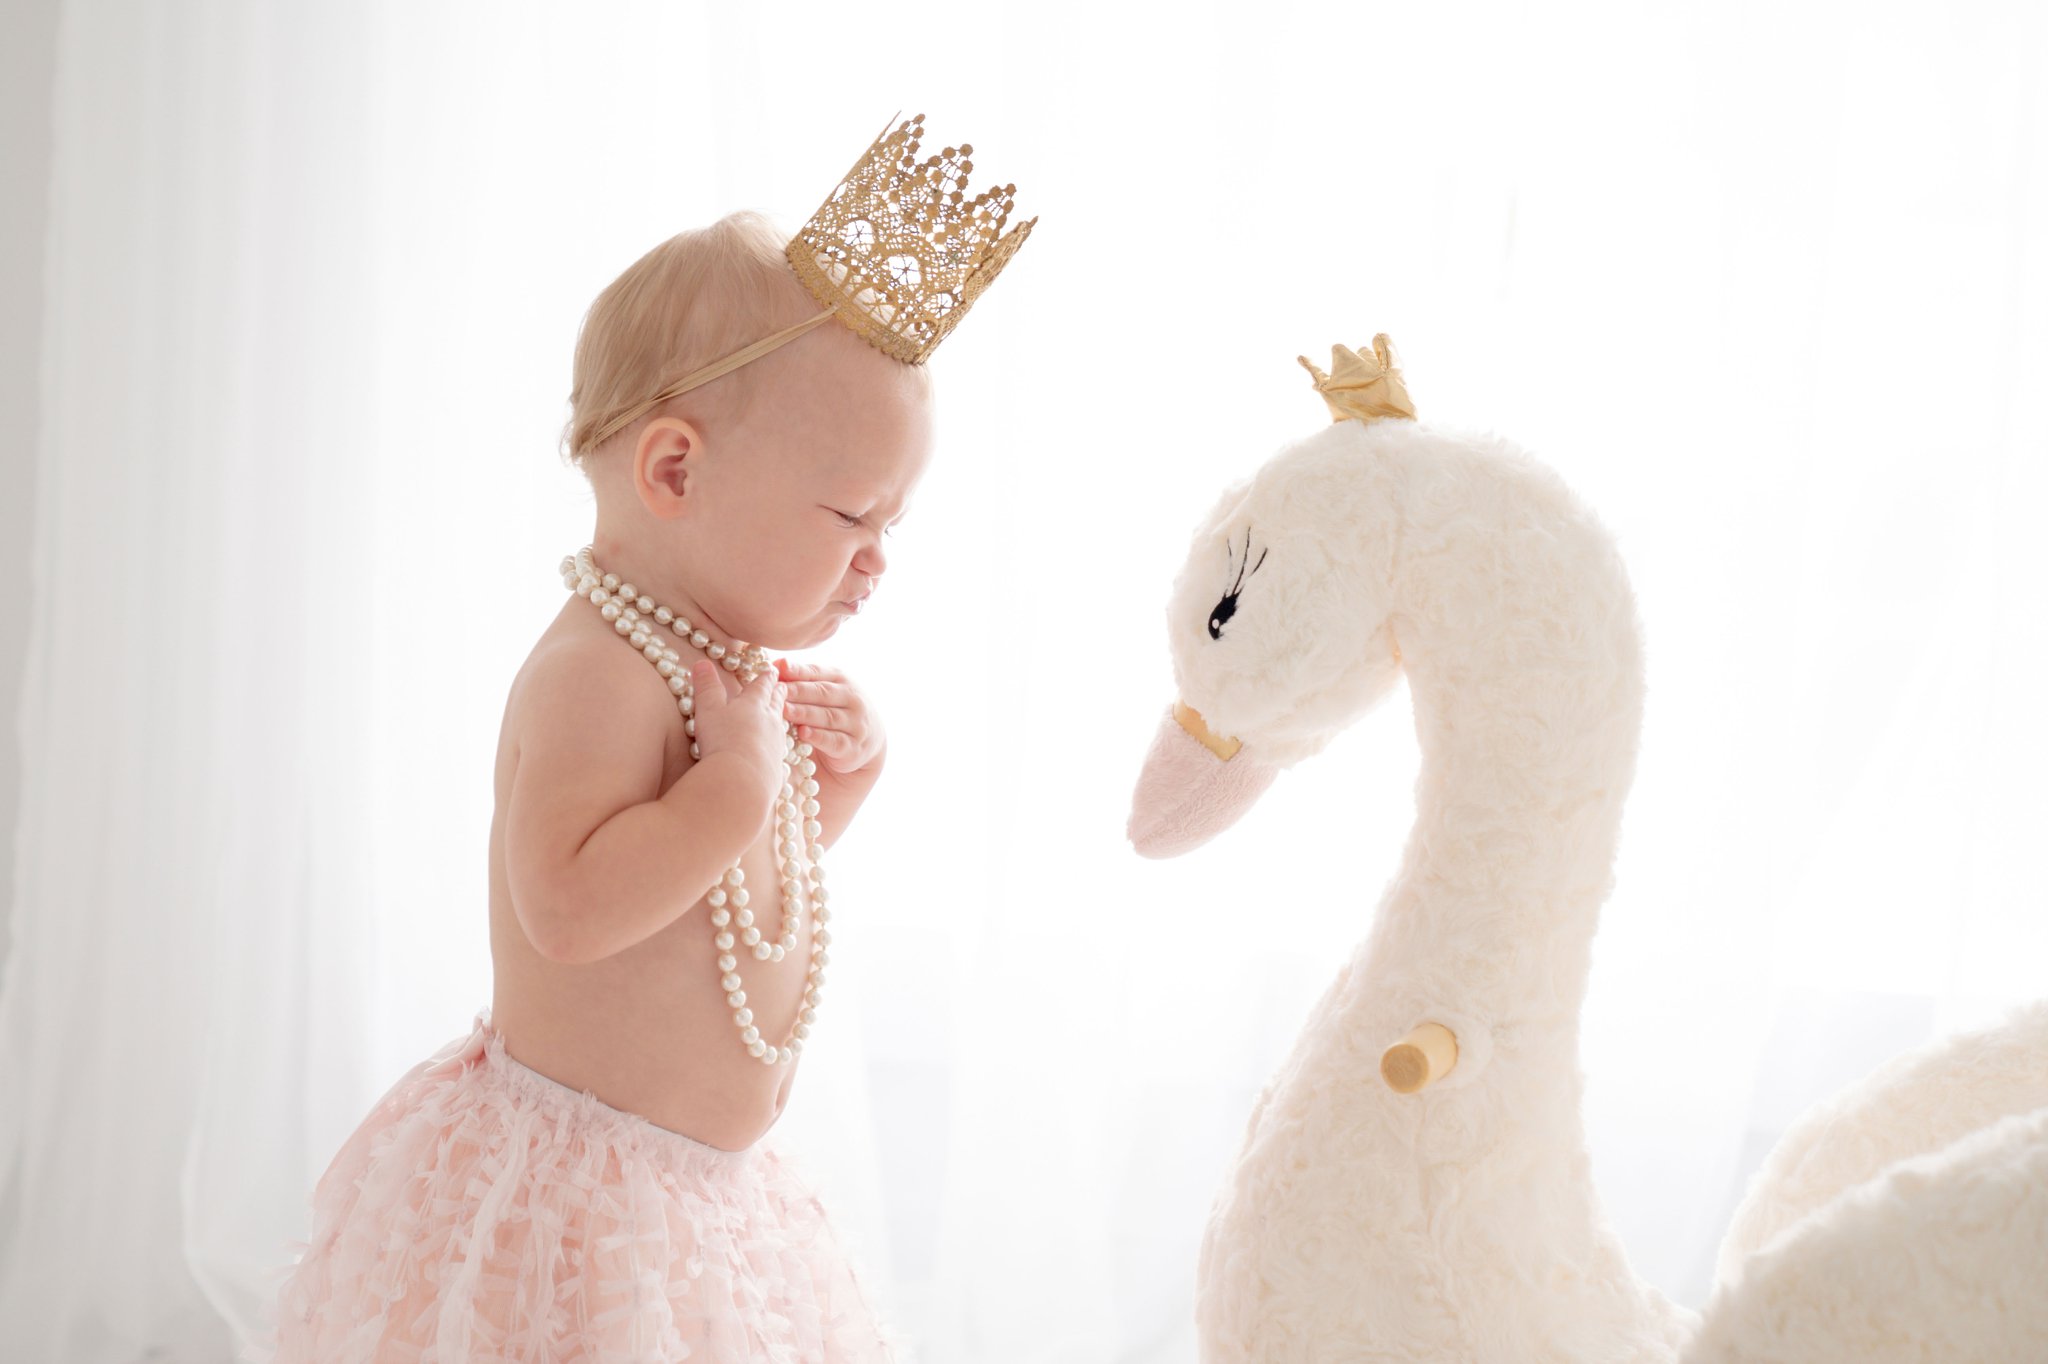 One Year old being photographed in a Jupiter Florida photography studio wearing pink skirt and crown and standing by a rocking swan.